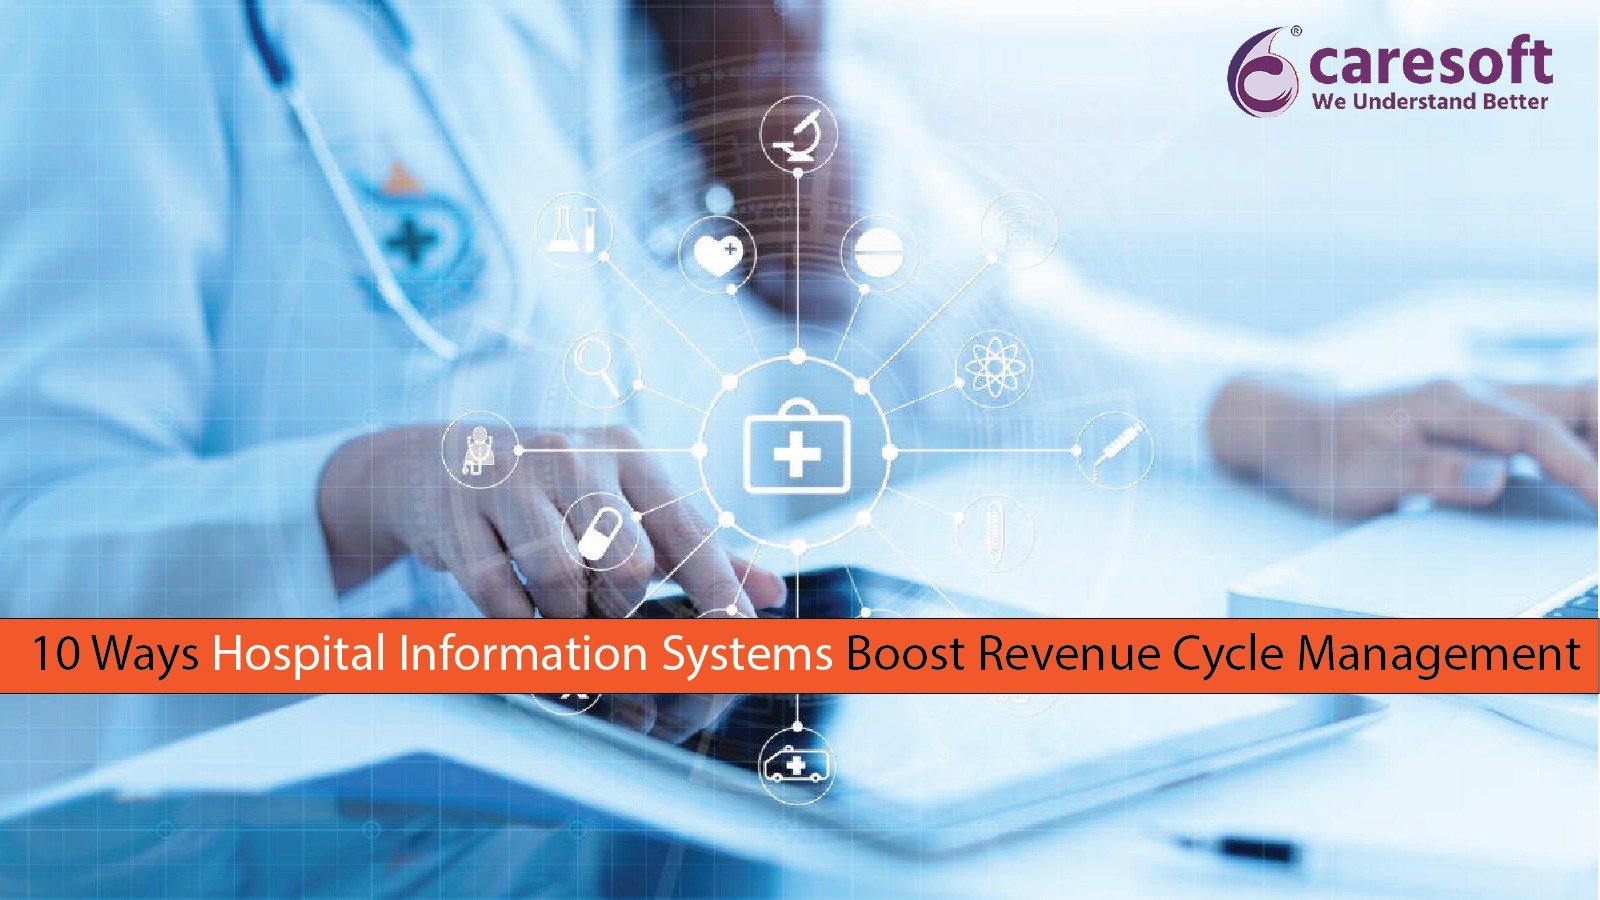 10 Ways Hospital Information Systems Boost Revenue Cycle Management